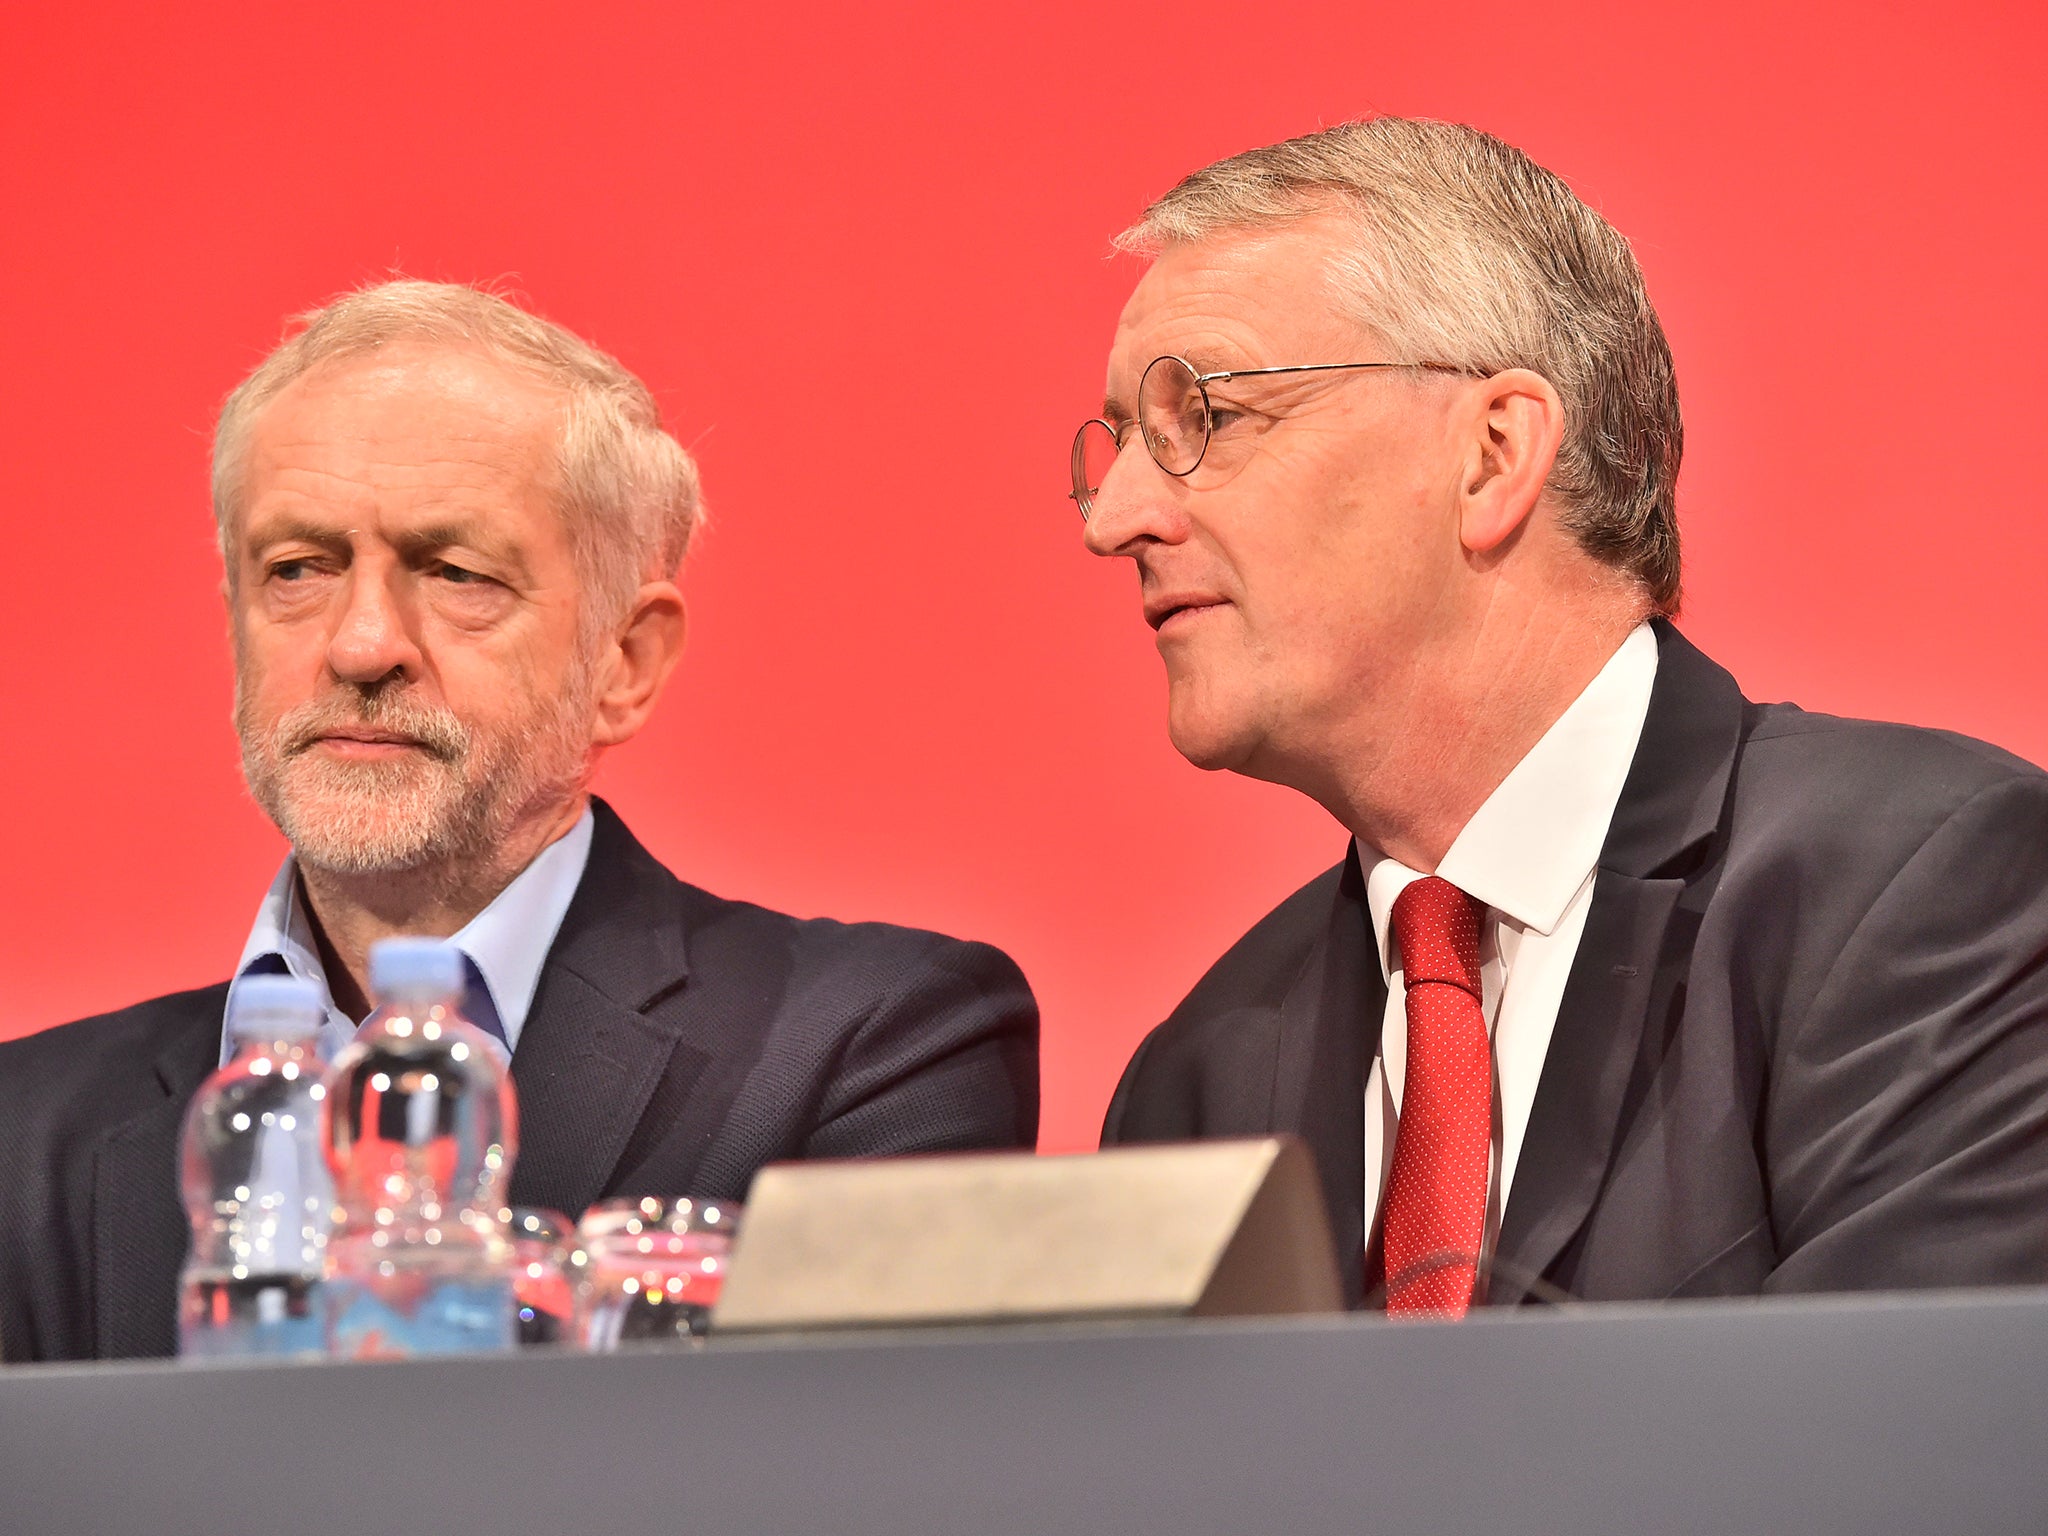 Hilary Benn is believed to have survived attempts to oust him as Shadow Foreign Secretary